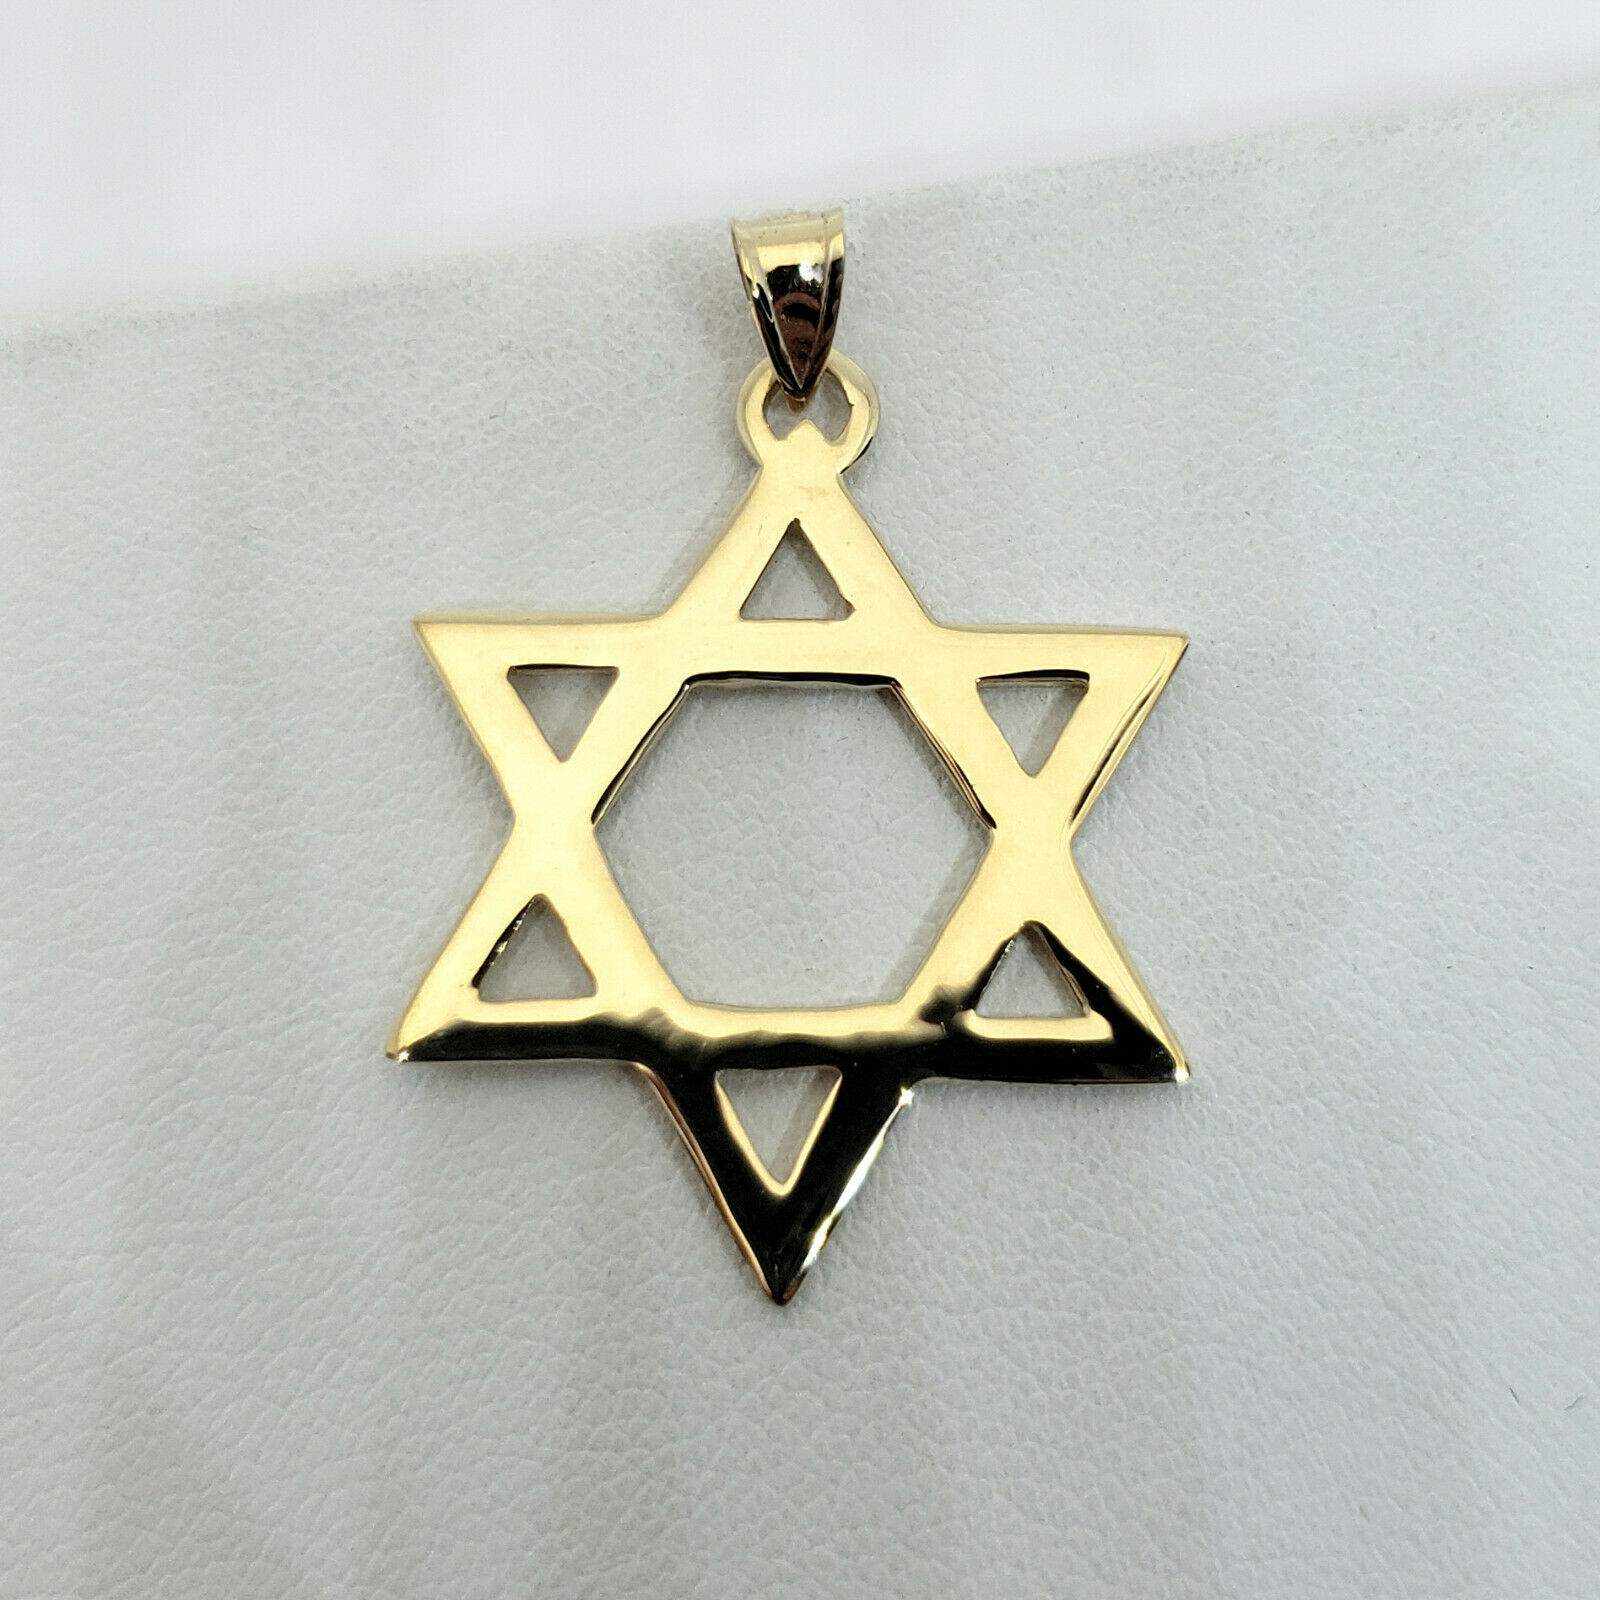 14 KT GOLD PLATED LARGE JEWISH STAR 1 INCH RELIGIOUS CHARM PENDANT-A77 